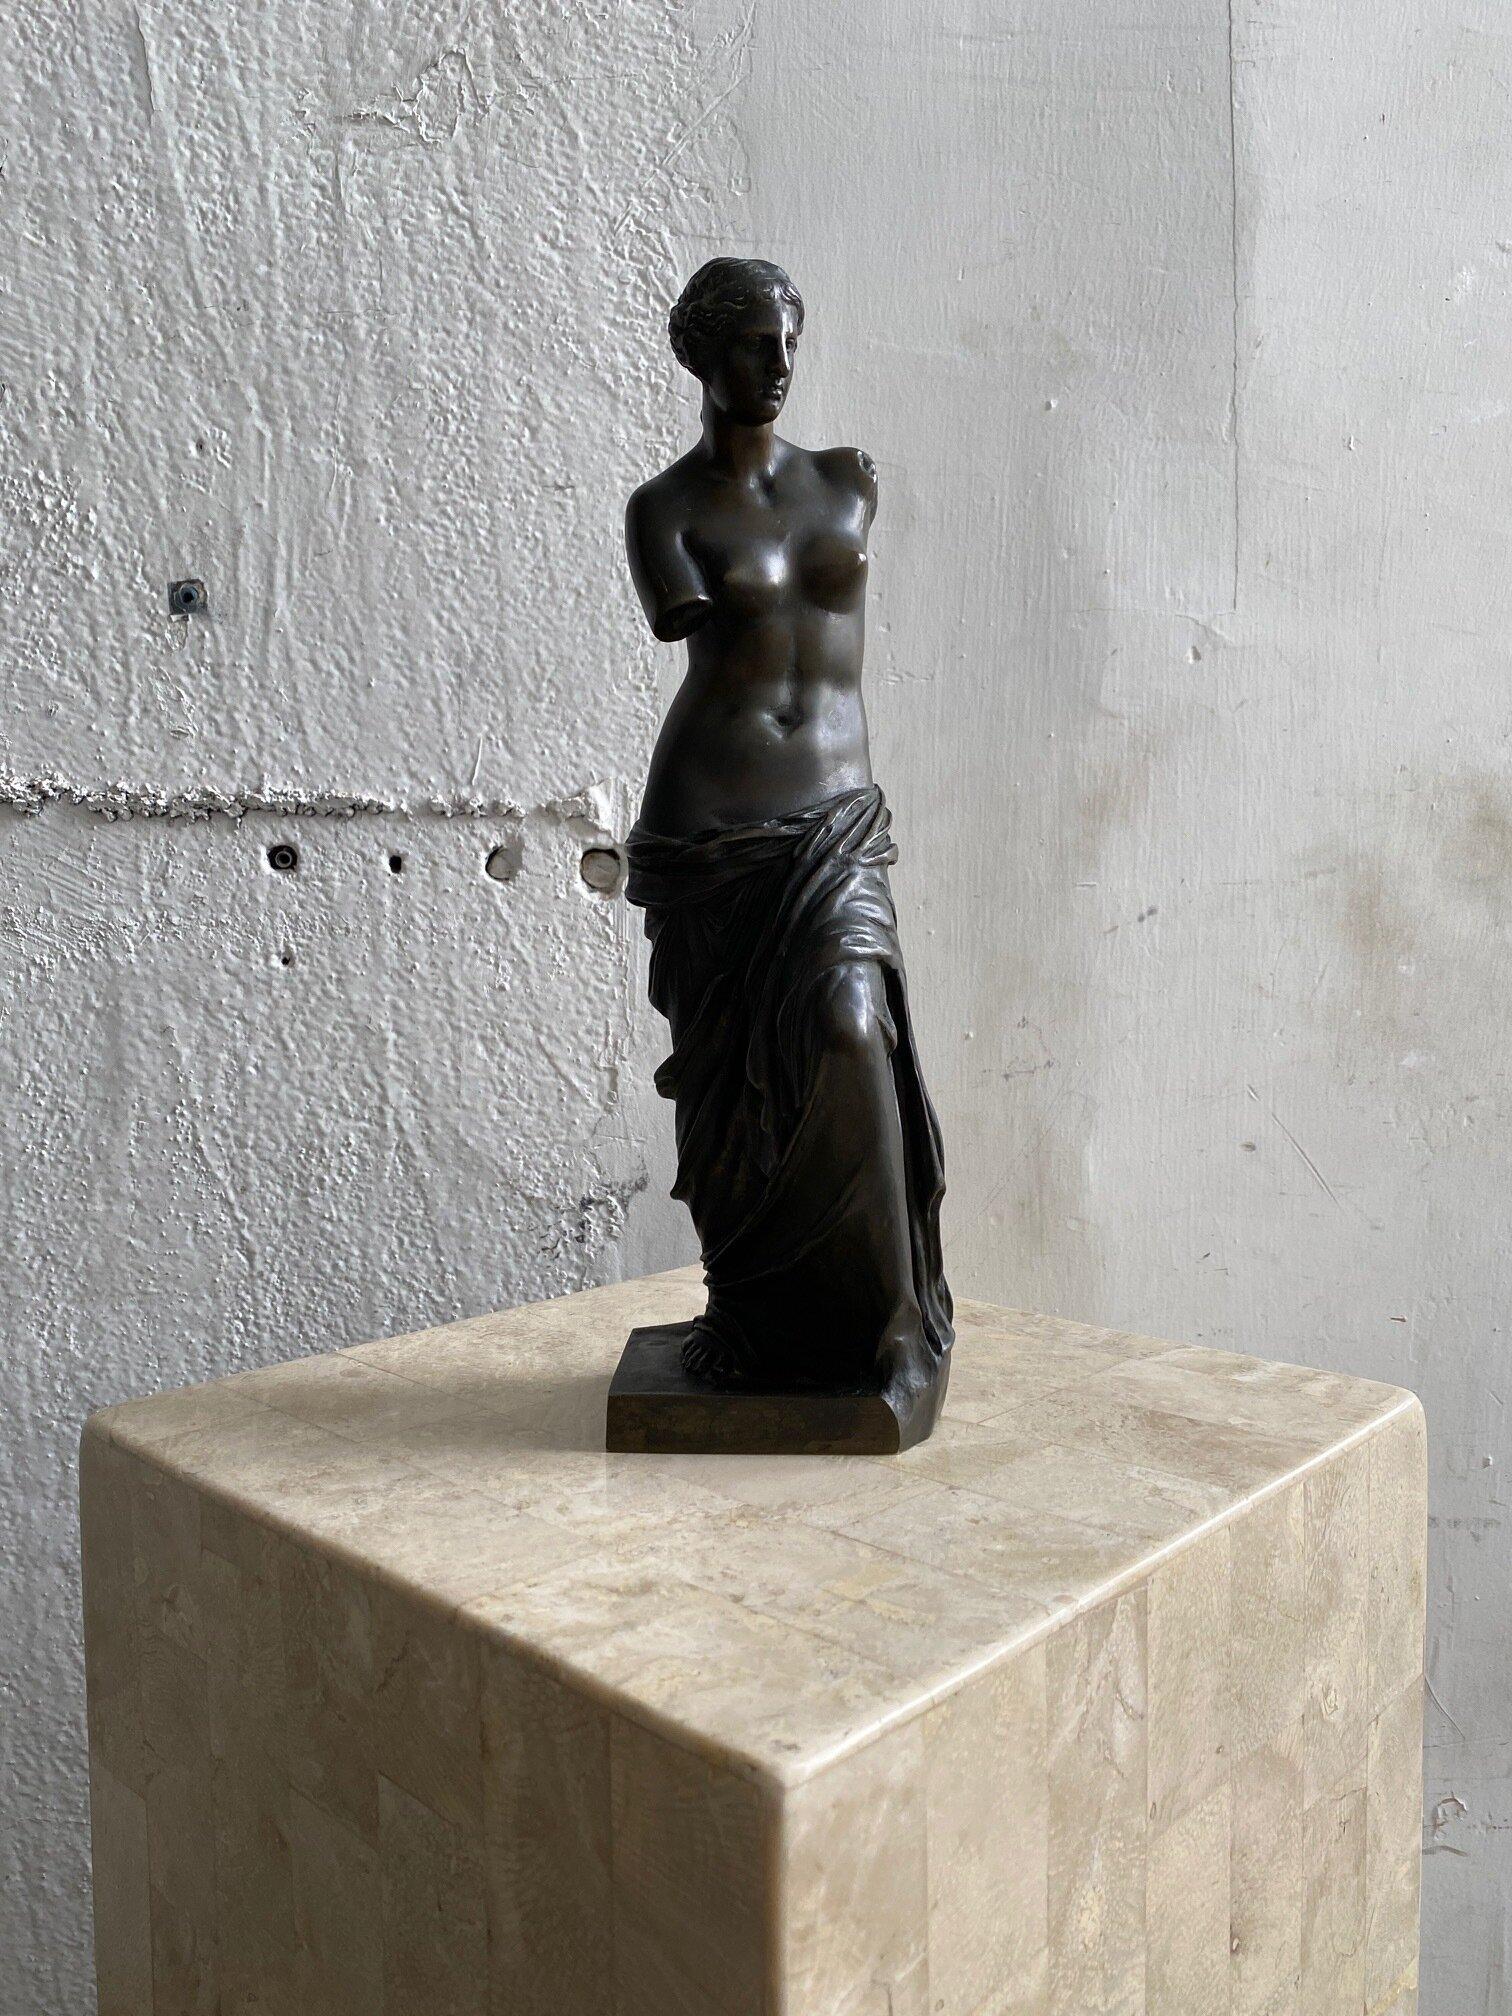 Antique Venus de Milo Grand Tour bronze, circa Late 19th Century. Intricately detailed hollow cast bronze form. Beautifully rendered replicating the original ancient sculpture down to the folds in the fabric and soft form. Unsigned. 

Specs: 4”